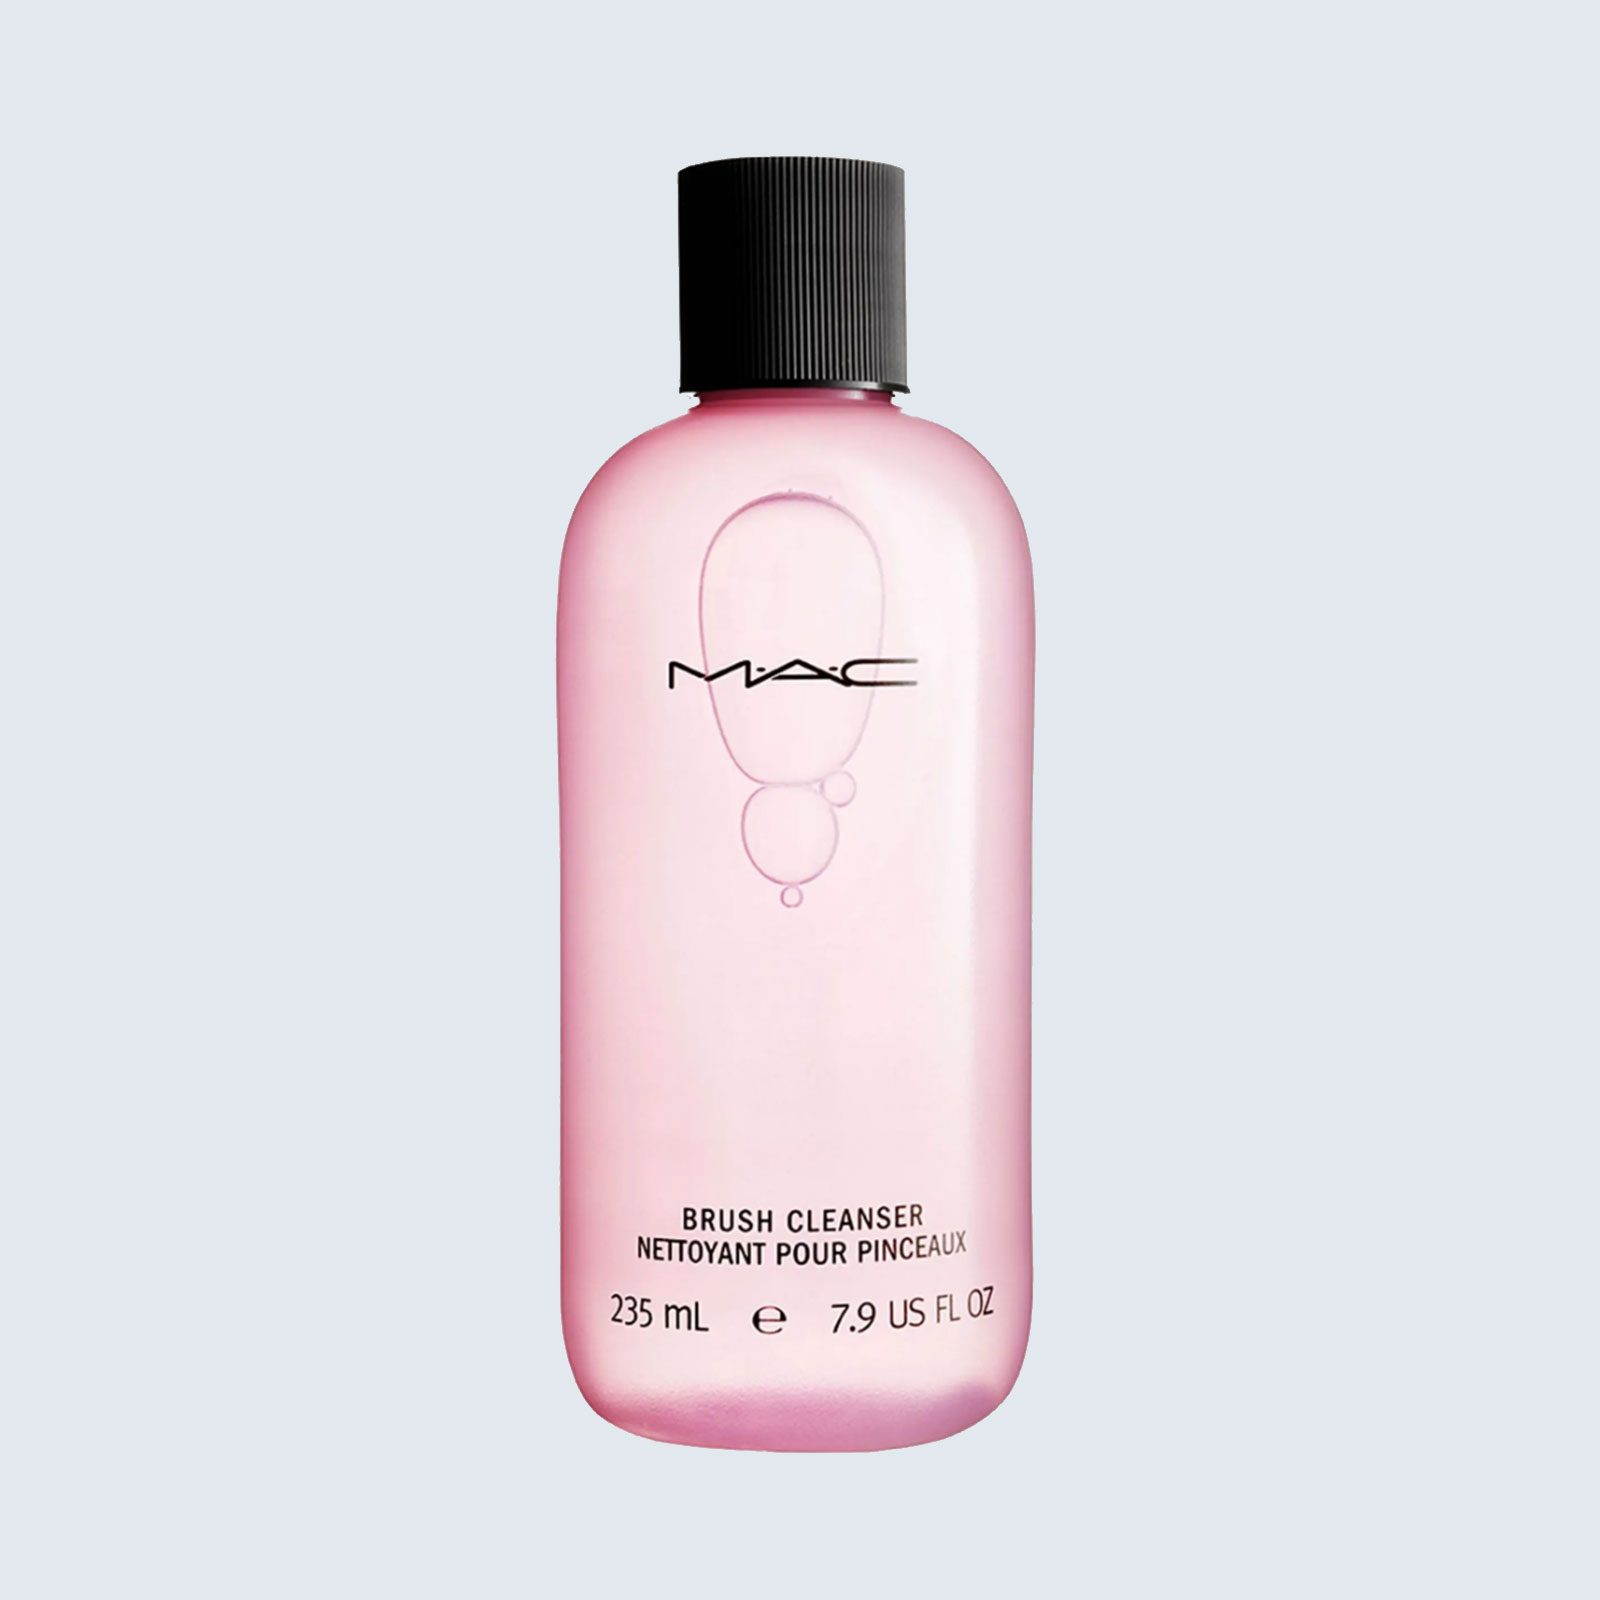 Best conditioning cleanser: MAC Cosmetics Brush Cleaner